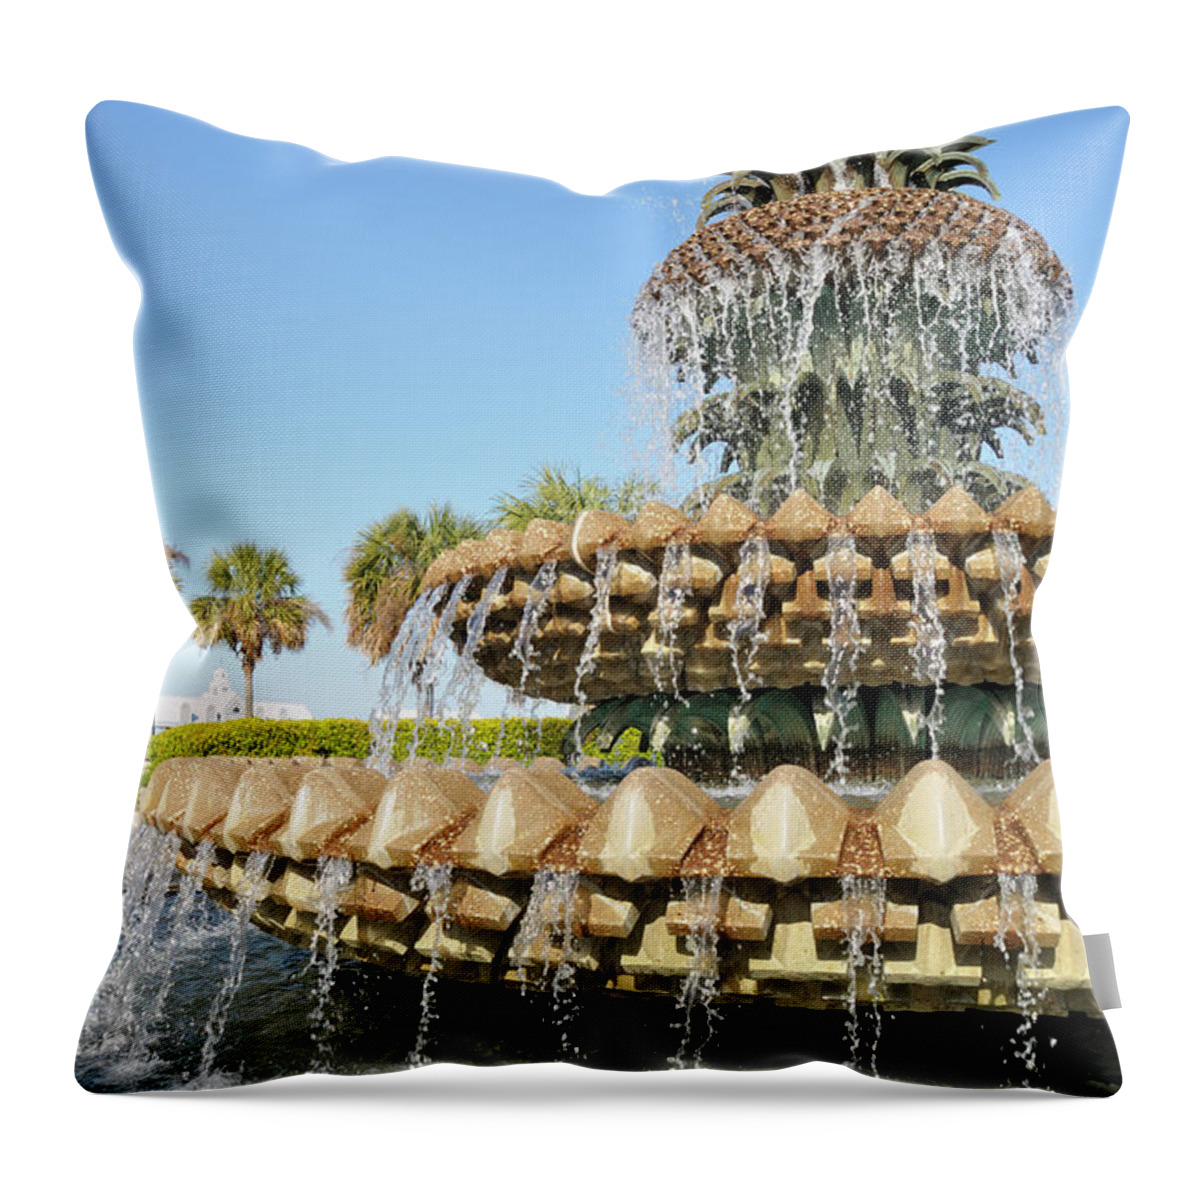 Clear Sky Throw Pillow featuring the photograph Pineapple Fountain, Charleston by Rivernorthphotography